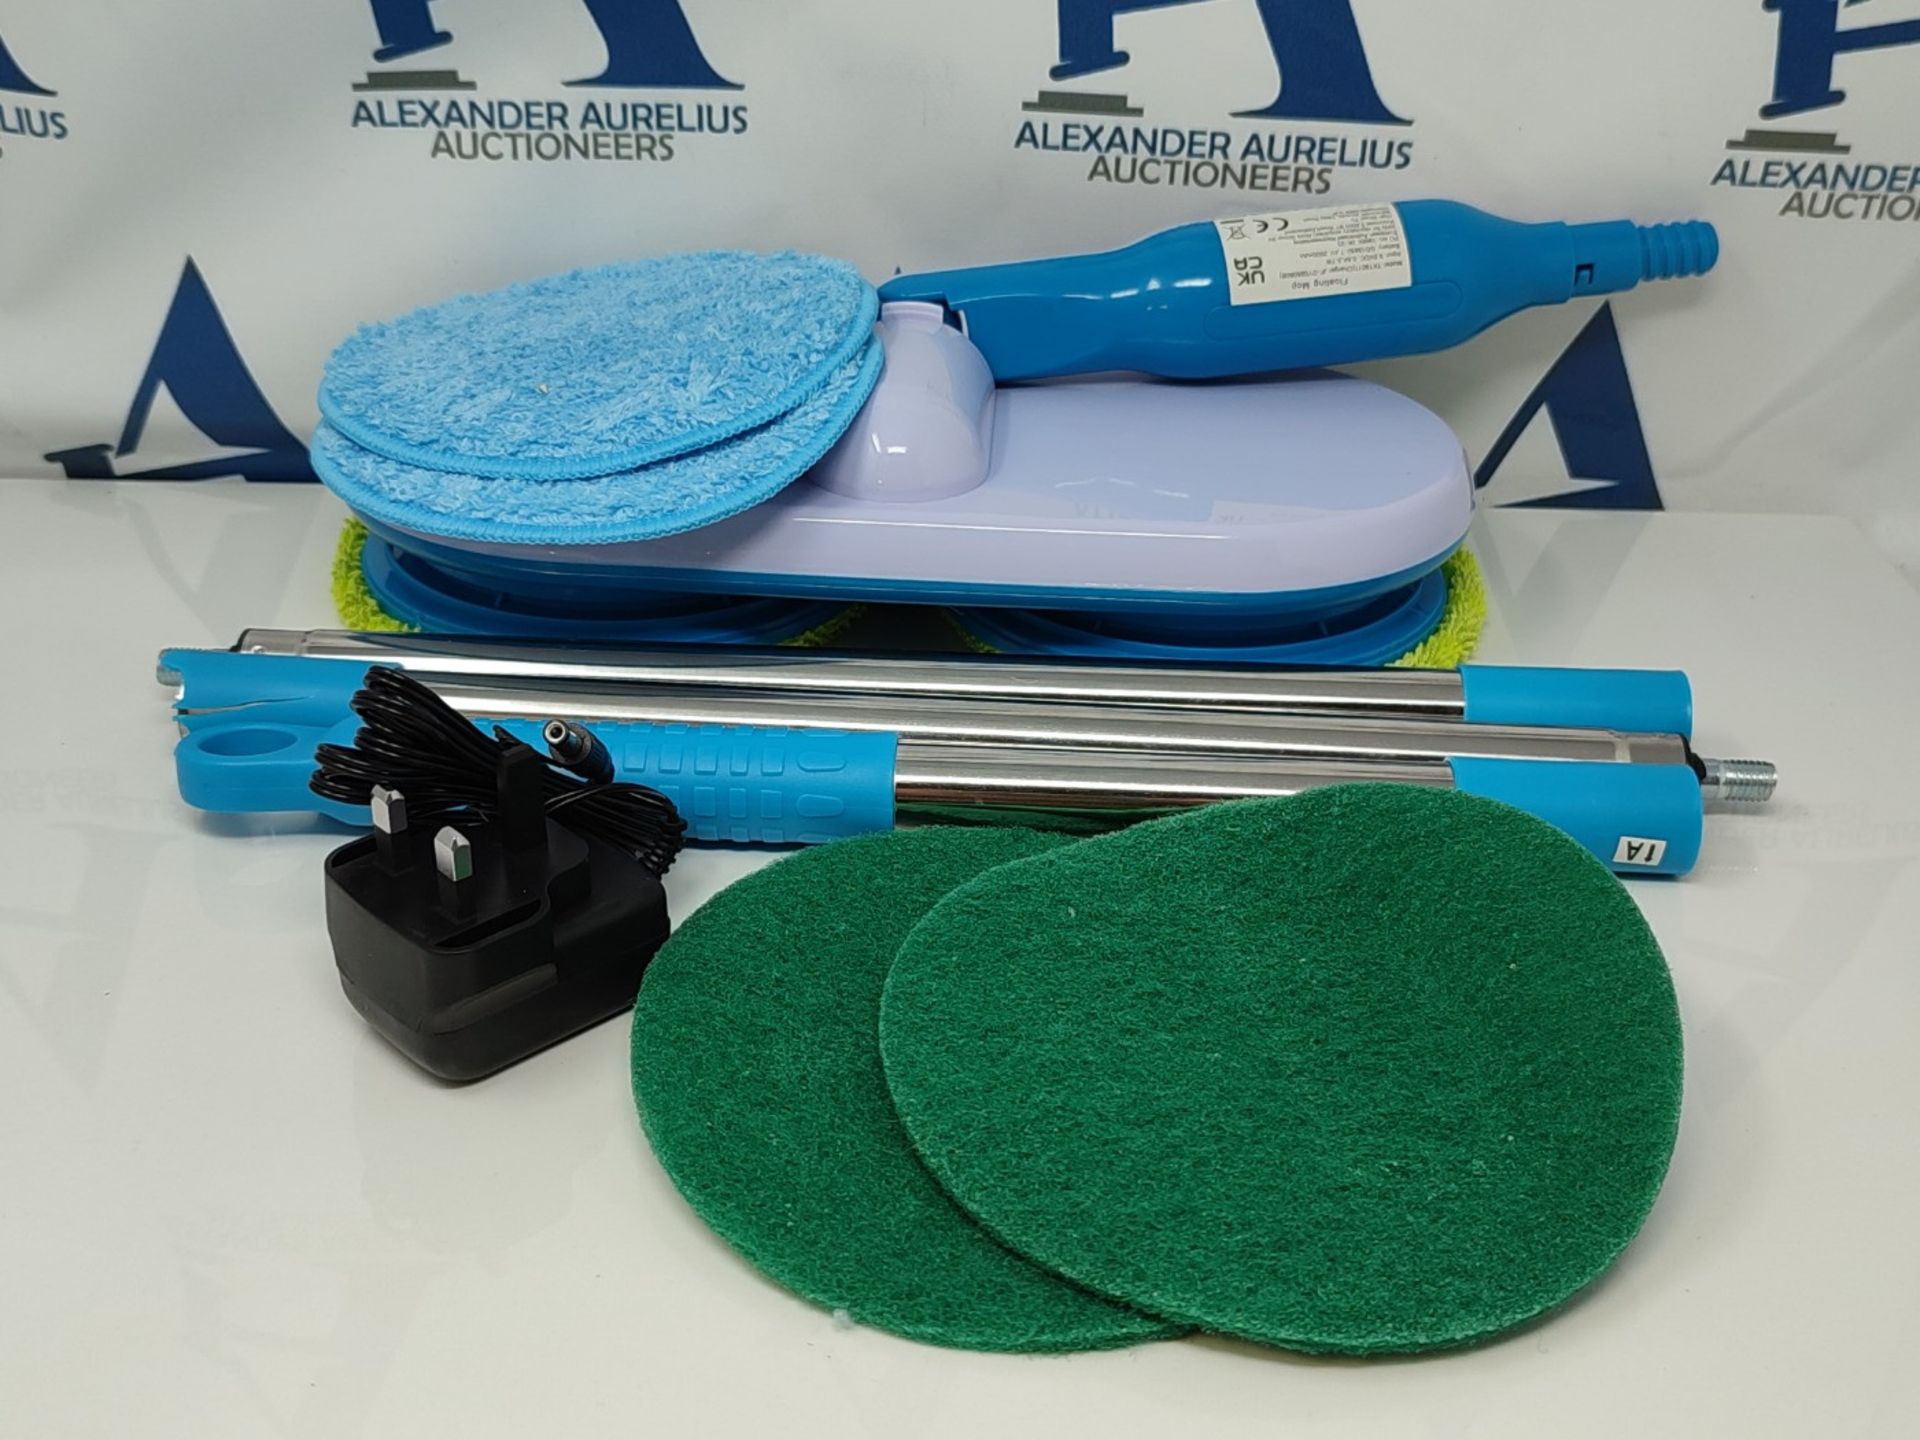 High Street TV Floating Mop - Motorised Cordless & Rechargeable - Spinning Mop - Inclu - Image 6 of 6